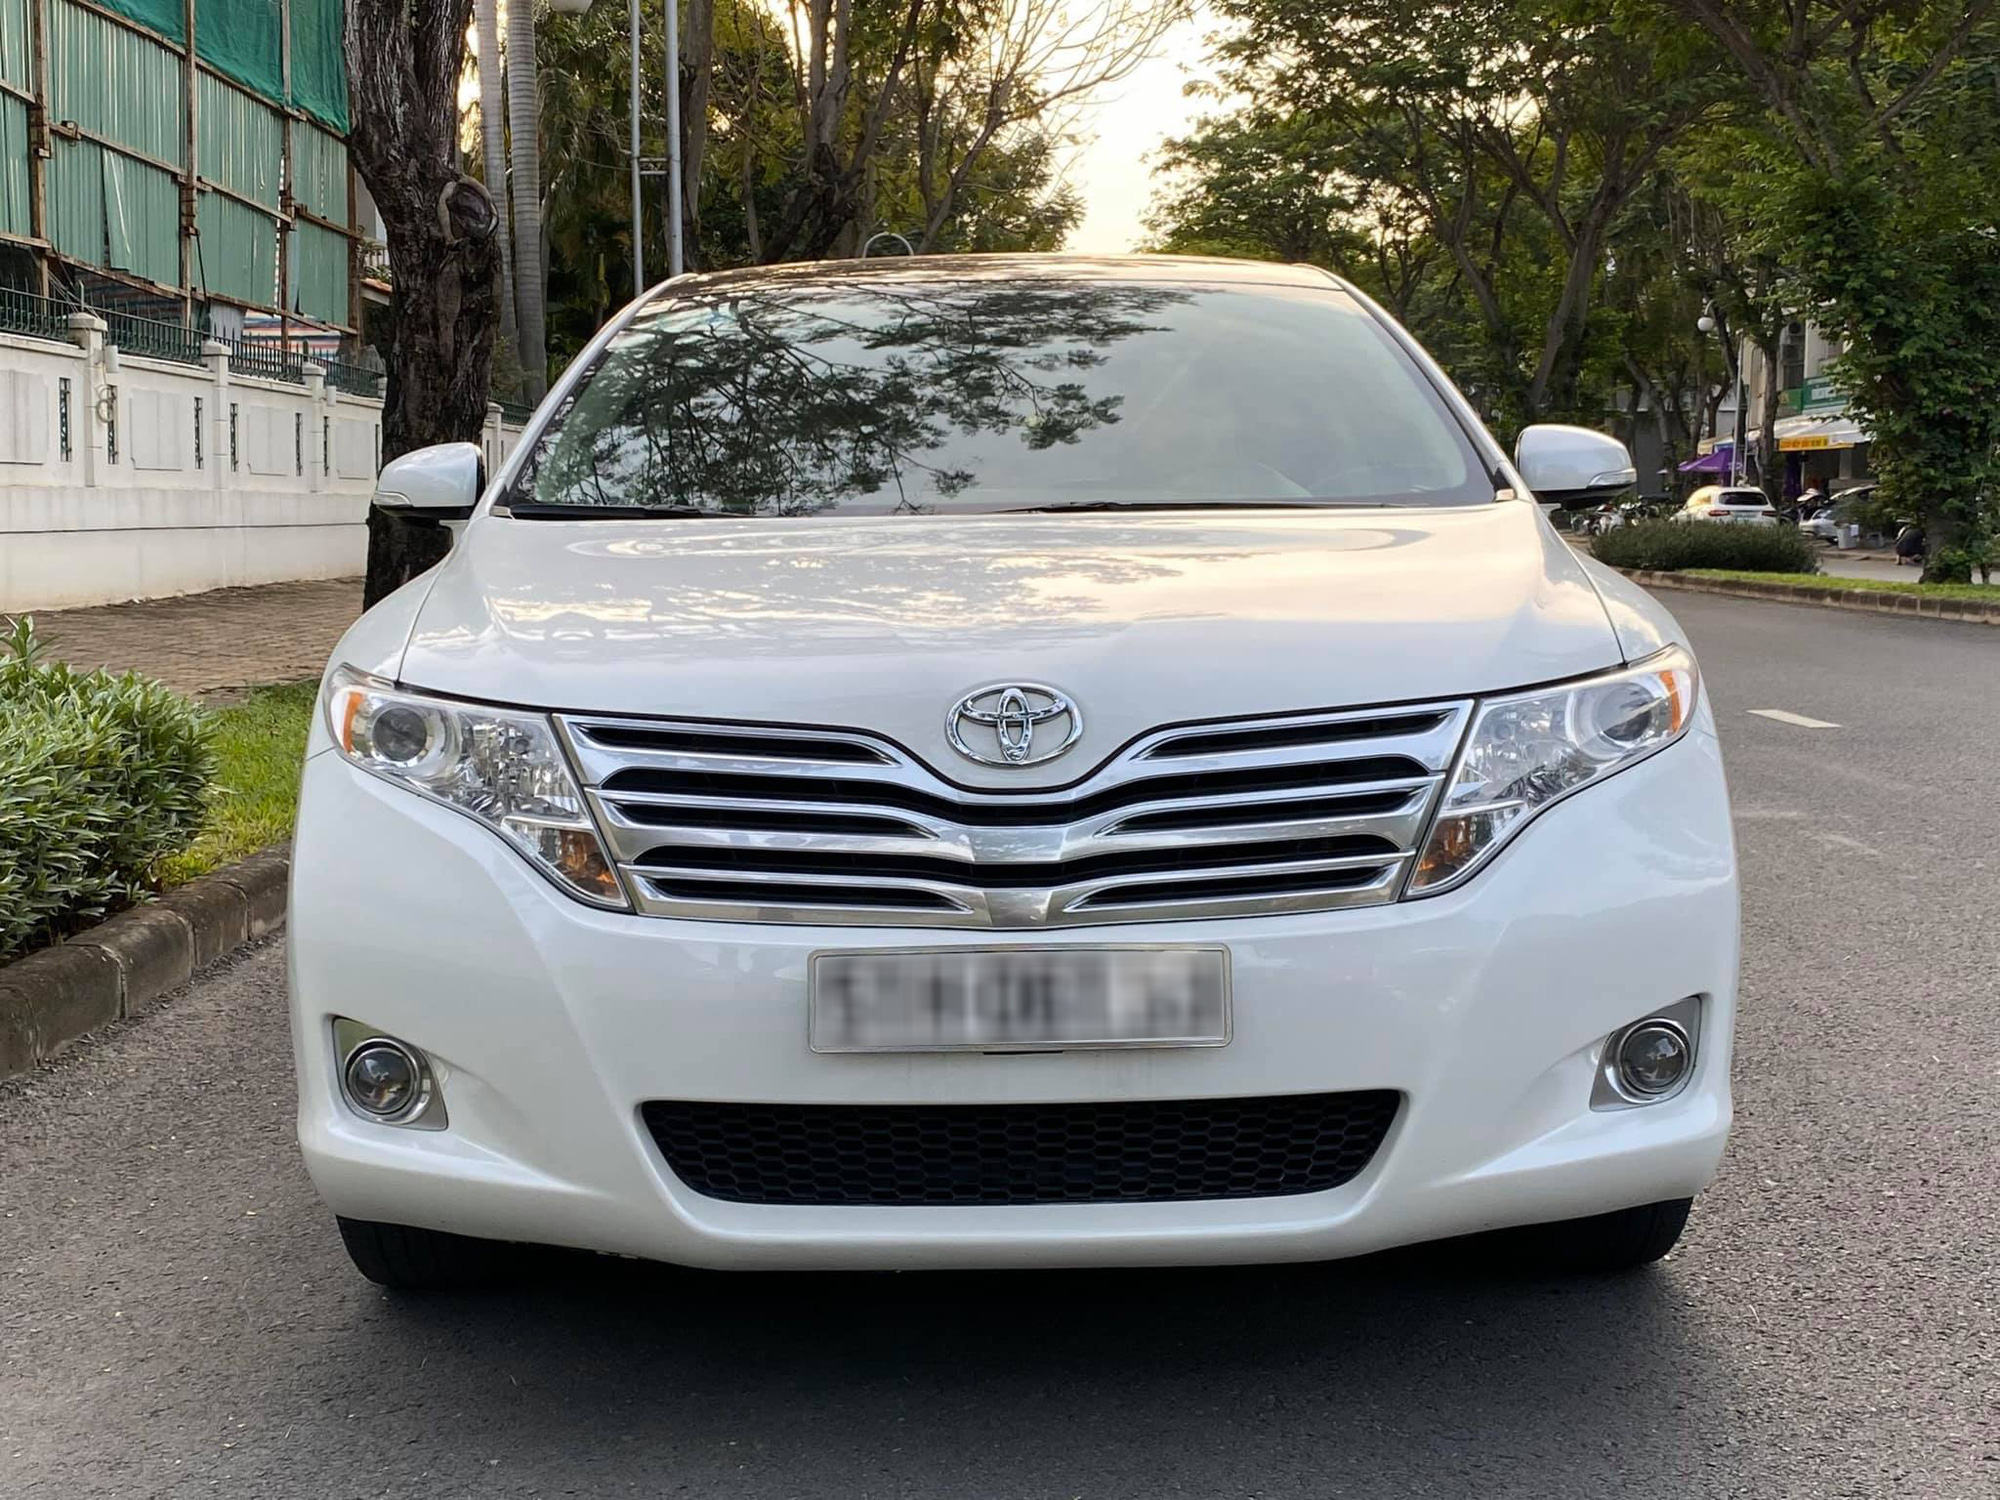 2010 Toyota Venza Review Trims Specs Price New Interior Features  Exterior Design and Specifications  CarBuzz